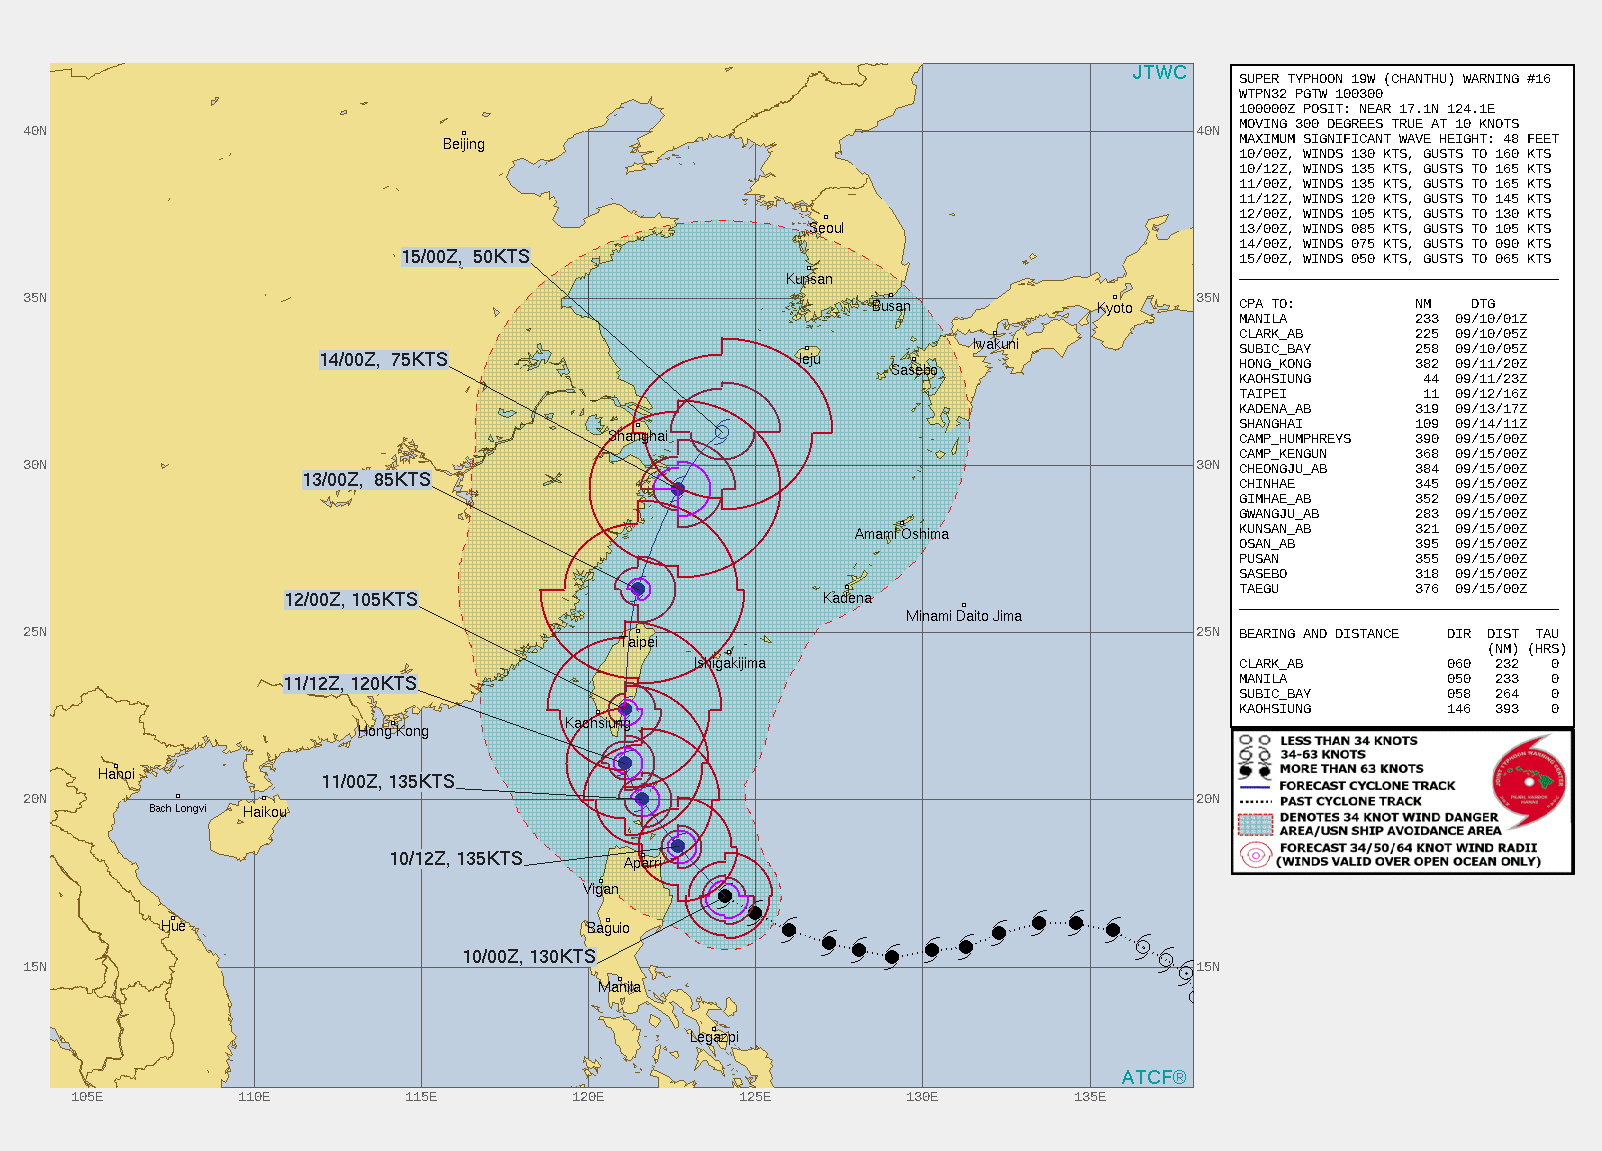 STY 19W(CHANTHU). WARNING 17 ISSUED AT 10/03UTC.SIGNIFICANT FORECAST CHANGES: THERE ARE NO SIGNIFICANT CHANGES TO THE FORECAST FROM THE PREVIOUS WARNING.  FORECAST DISCUSSION: FOLLOWING EYEWALL REPLACEMENT CYCLE, STY CHANTU IS POISED FOR ANOTHER INTENSIFICATION, ALBEIT A MORE MODEST ONE AS IT ROUNDS THE WESTERN EDGE OF THE SUBTROPCIAL RIDGE UNDER A HIGHLY FAVORABLE ENVIRONMENT TOWARD TAIWAN, PEAKING AT 135KNOTS/CAT 4 IN THE LUZON STRAIT JUST BEFORE LANDFALL INTO SOUTHERN TAIWAN AROUND 48H. AFTERWARD, LAND INTERACTION WITH TAIWAN AND INCREASING VERTICAL WIND SHEAR WILL GRADUALLY ERODE THE SYSTEM AS IT EXITS INTO THE EAST CHINA SEA AND BEELINES TOWARD CHEJU ISLAND, DOWN TO 50KNOTS BY 120H.